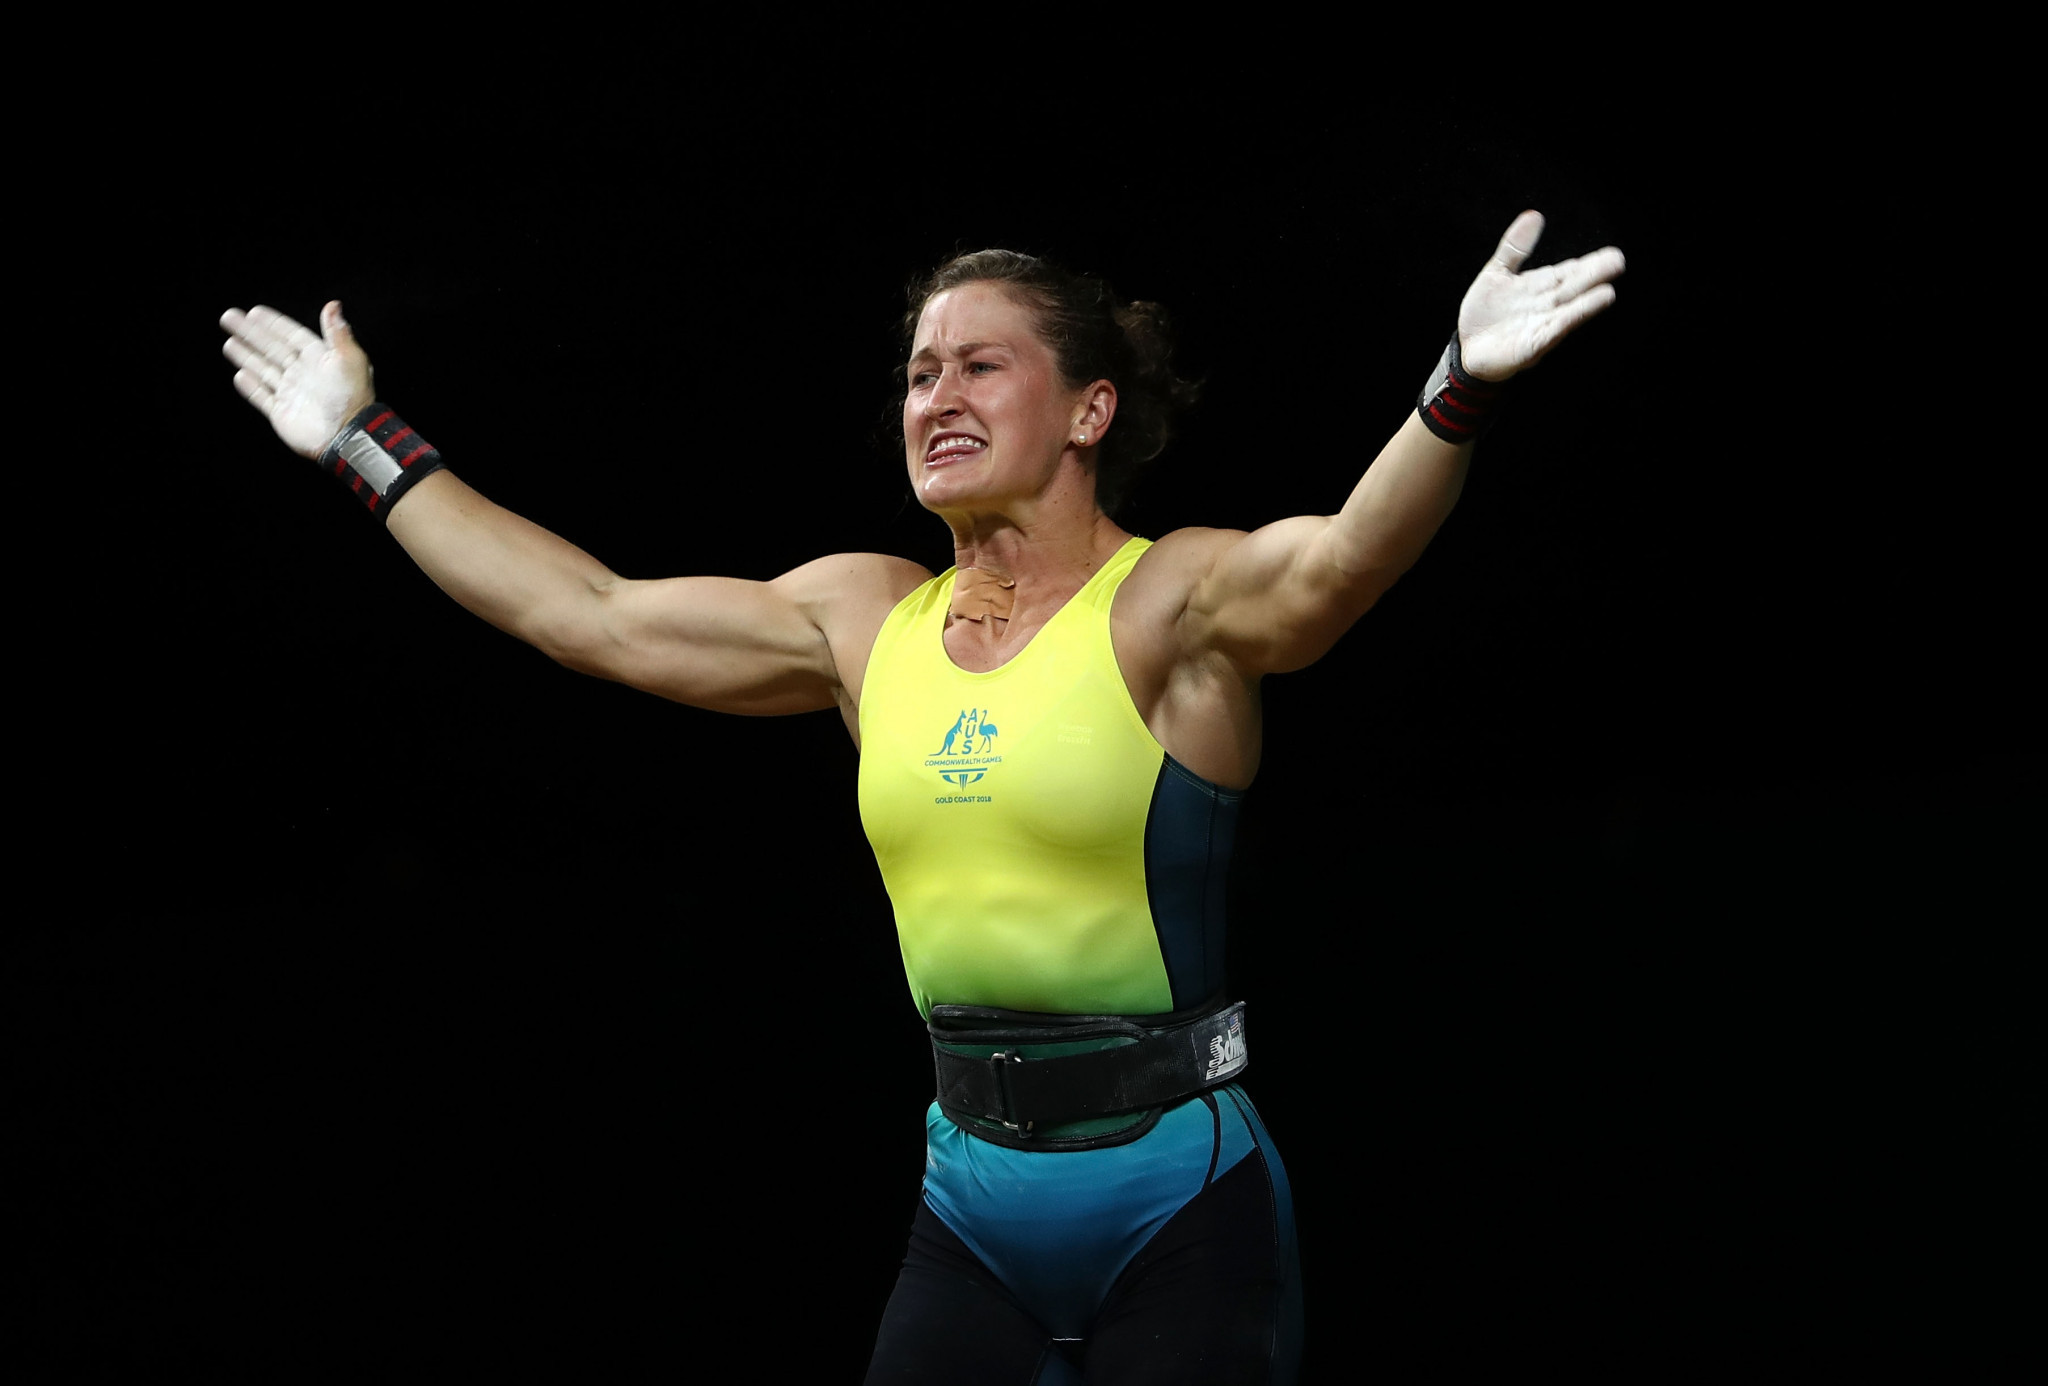 Home favourite Tia-Clair Toomey claimed the women’s 58 kilograms weightlifting gold medal after producing a sensational performance today at the Gold Coast 2018 Commonwealth Games ©Getty Images